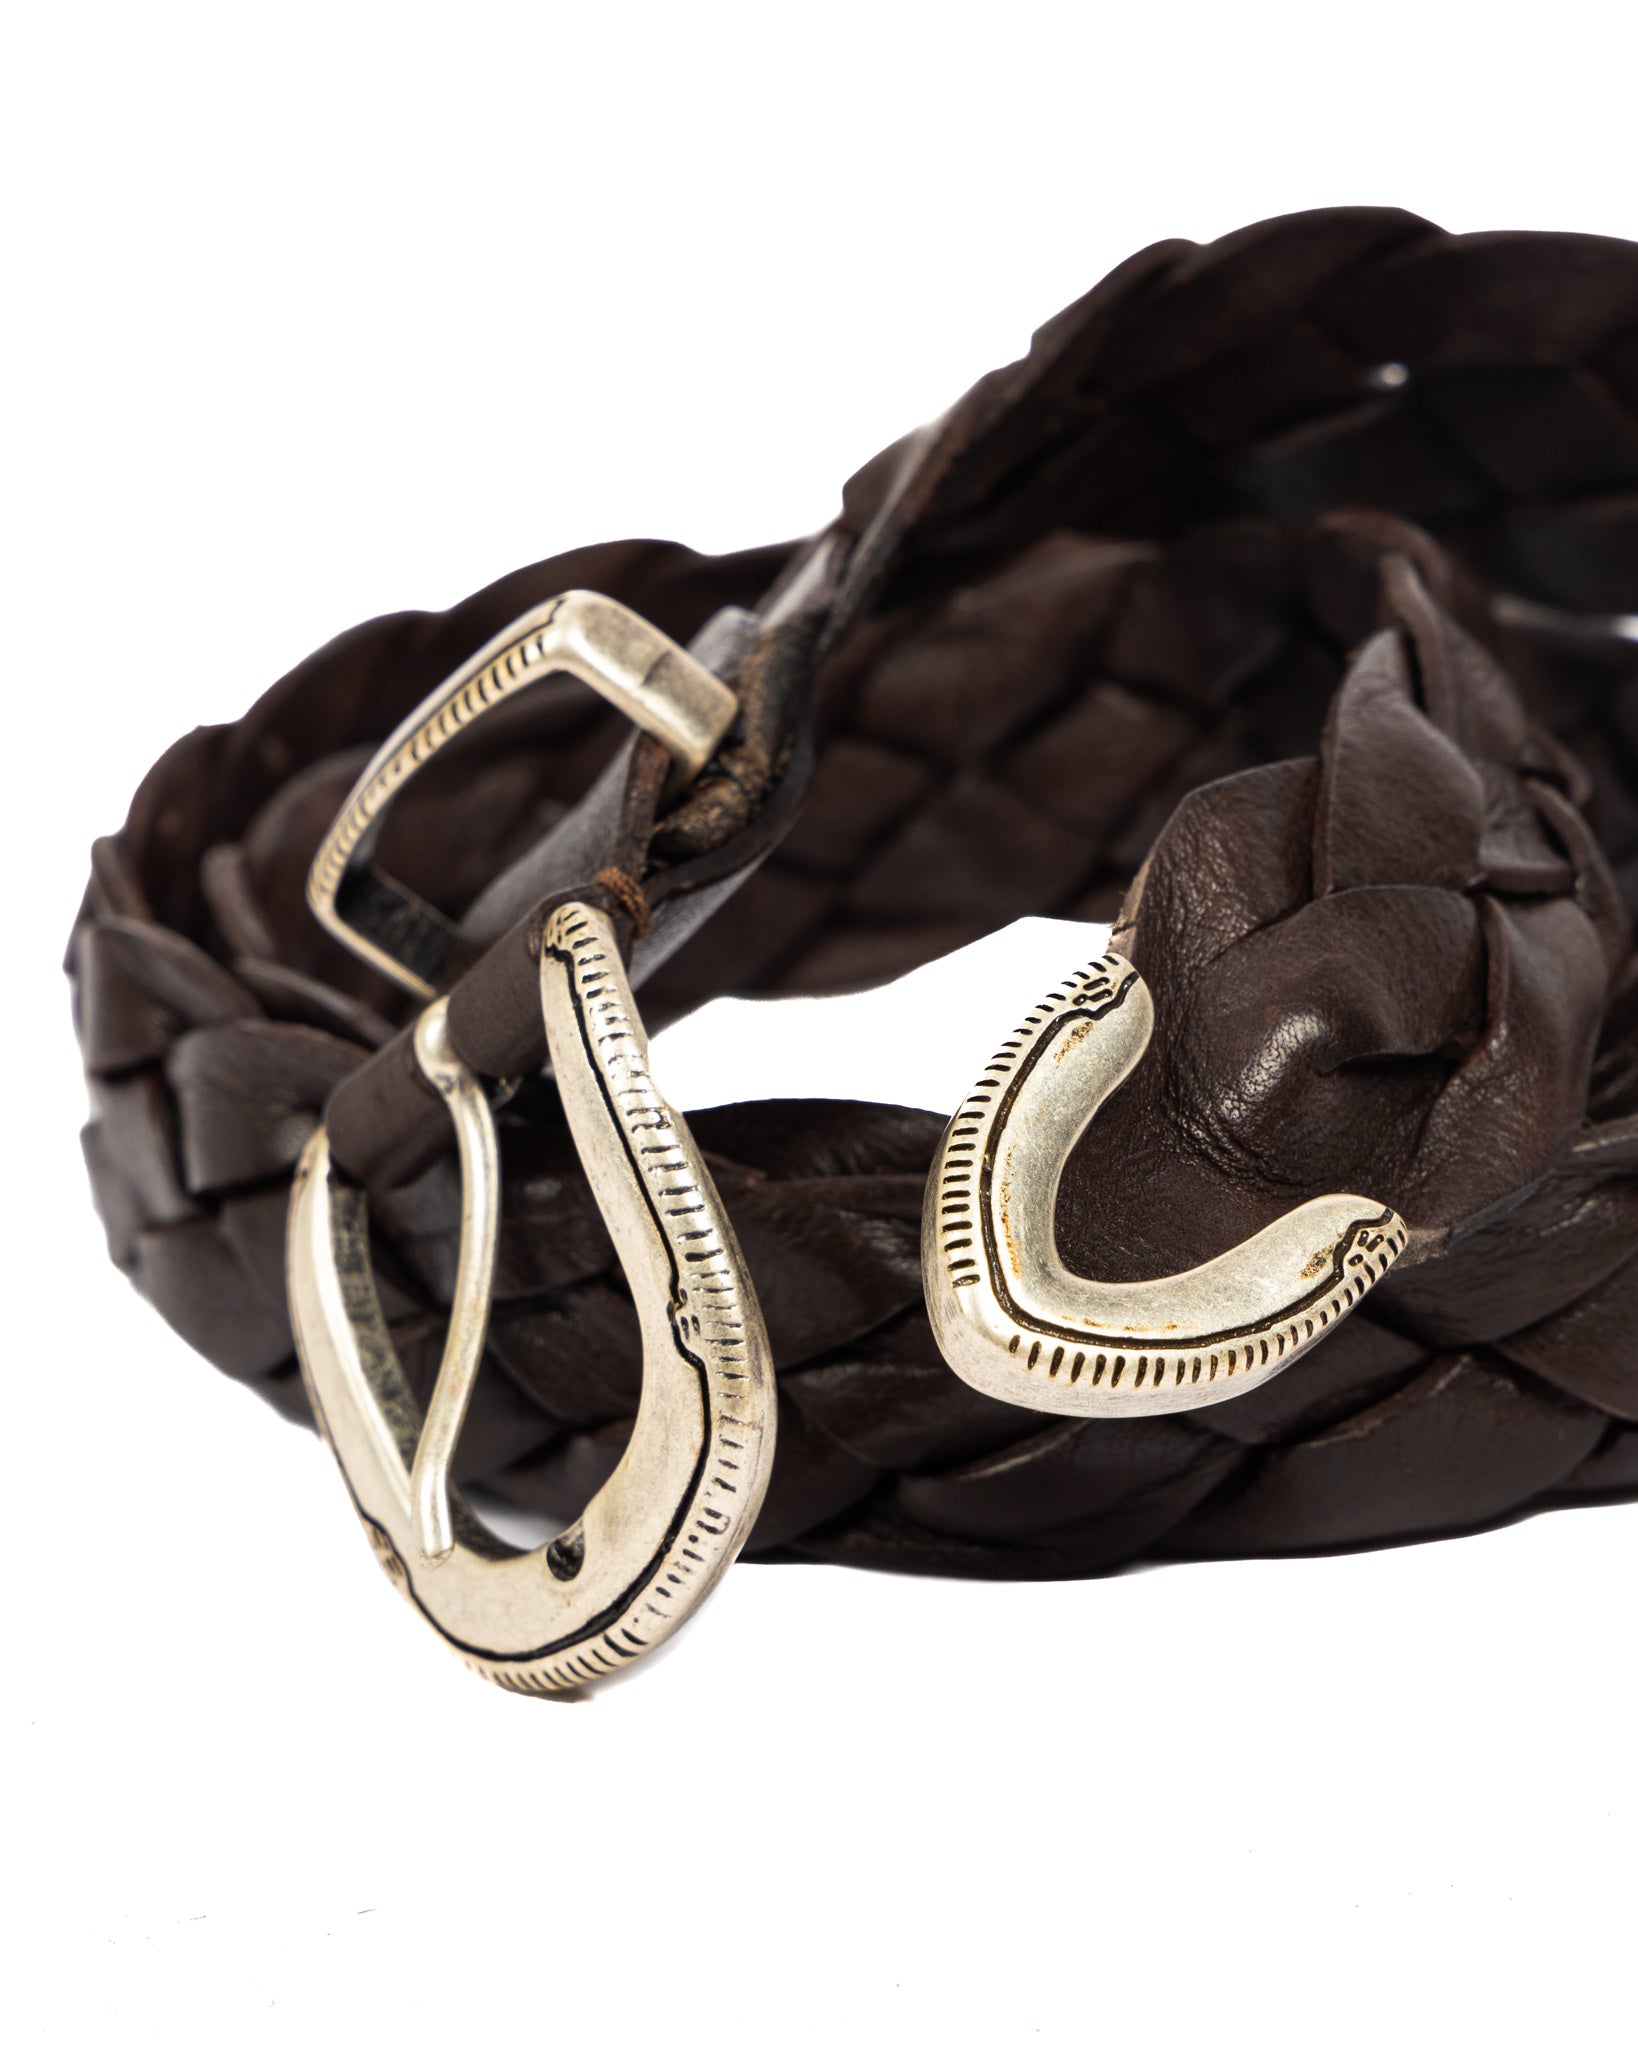 Chianti - dark brown leather belt with wide weave